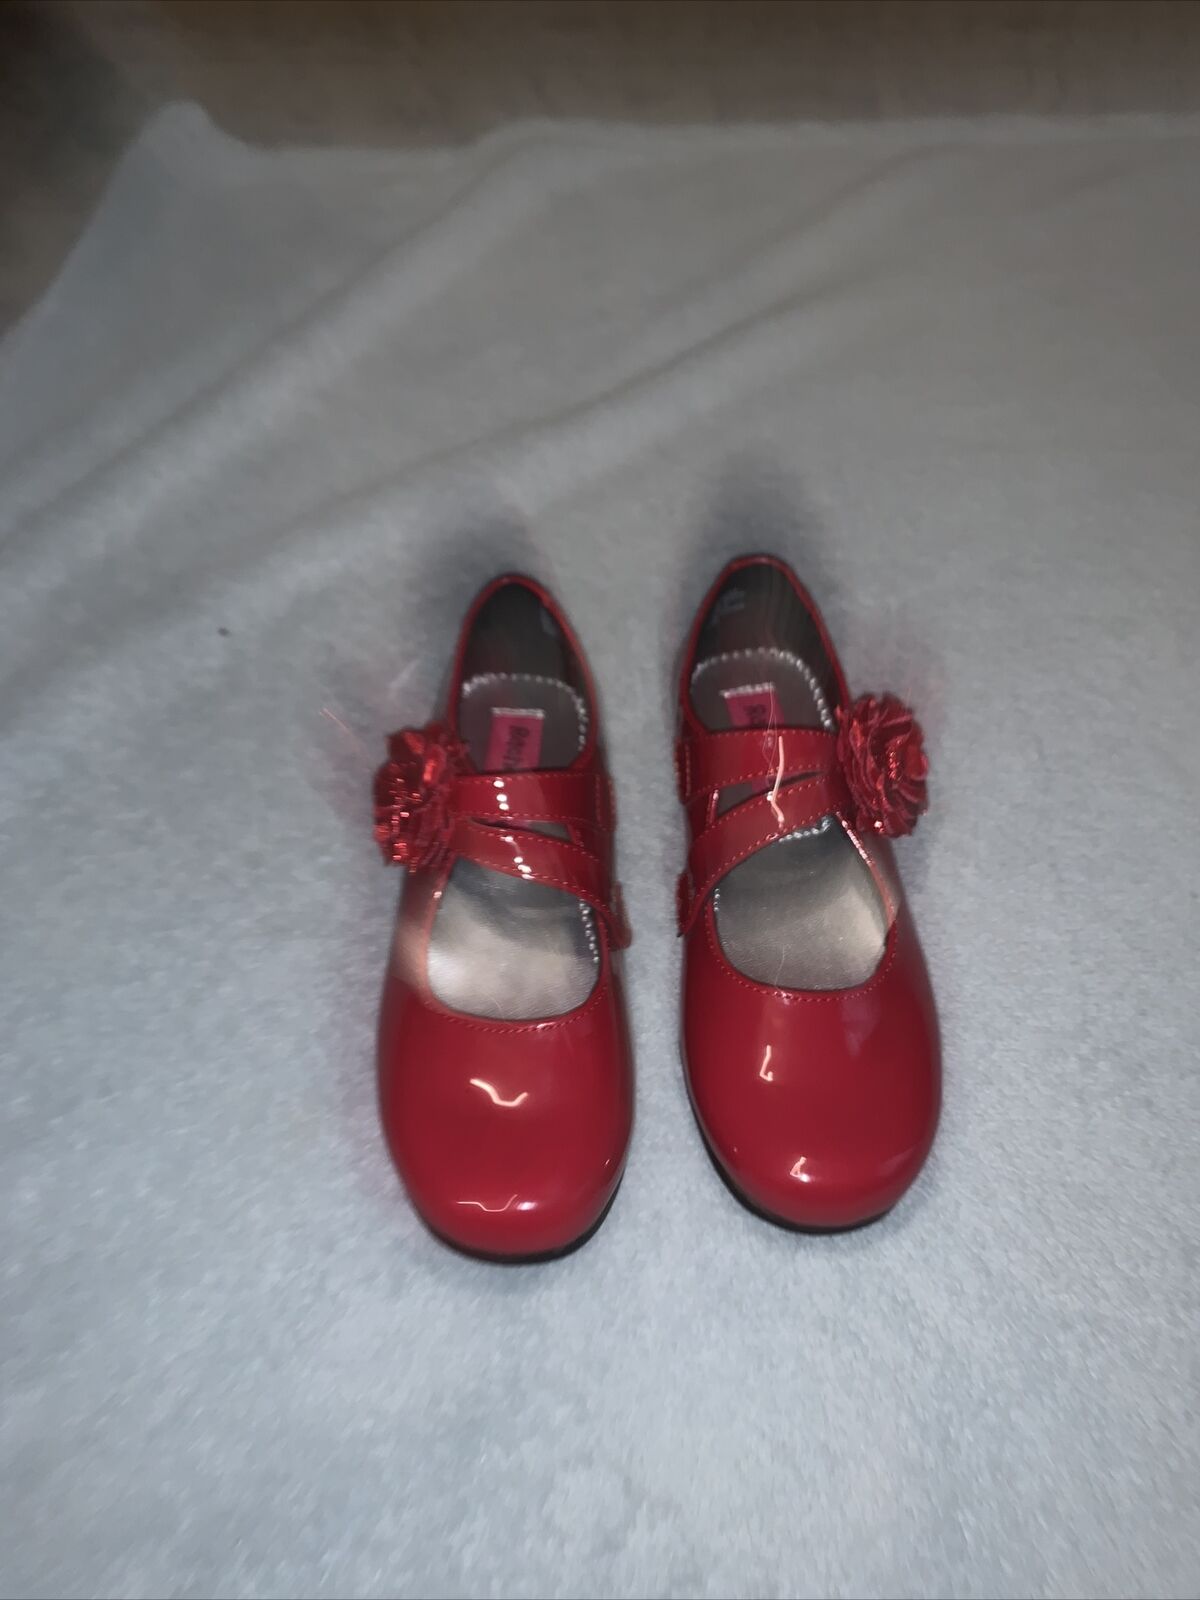 Girls Brena red patent shoe size1 by Rachel shoes